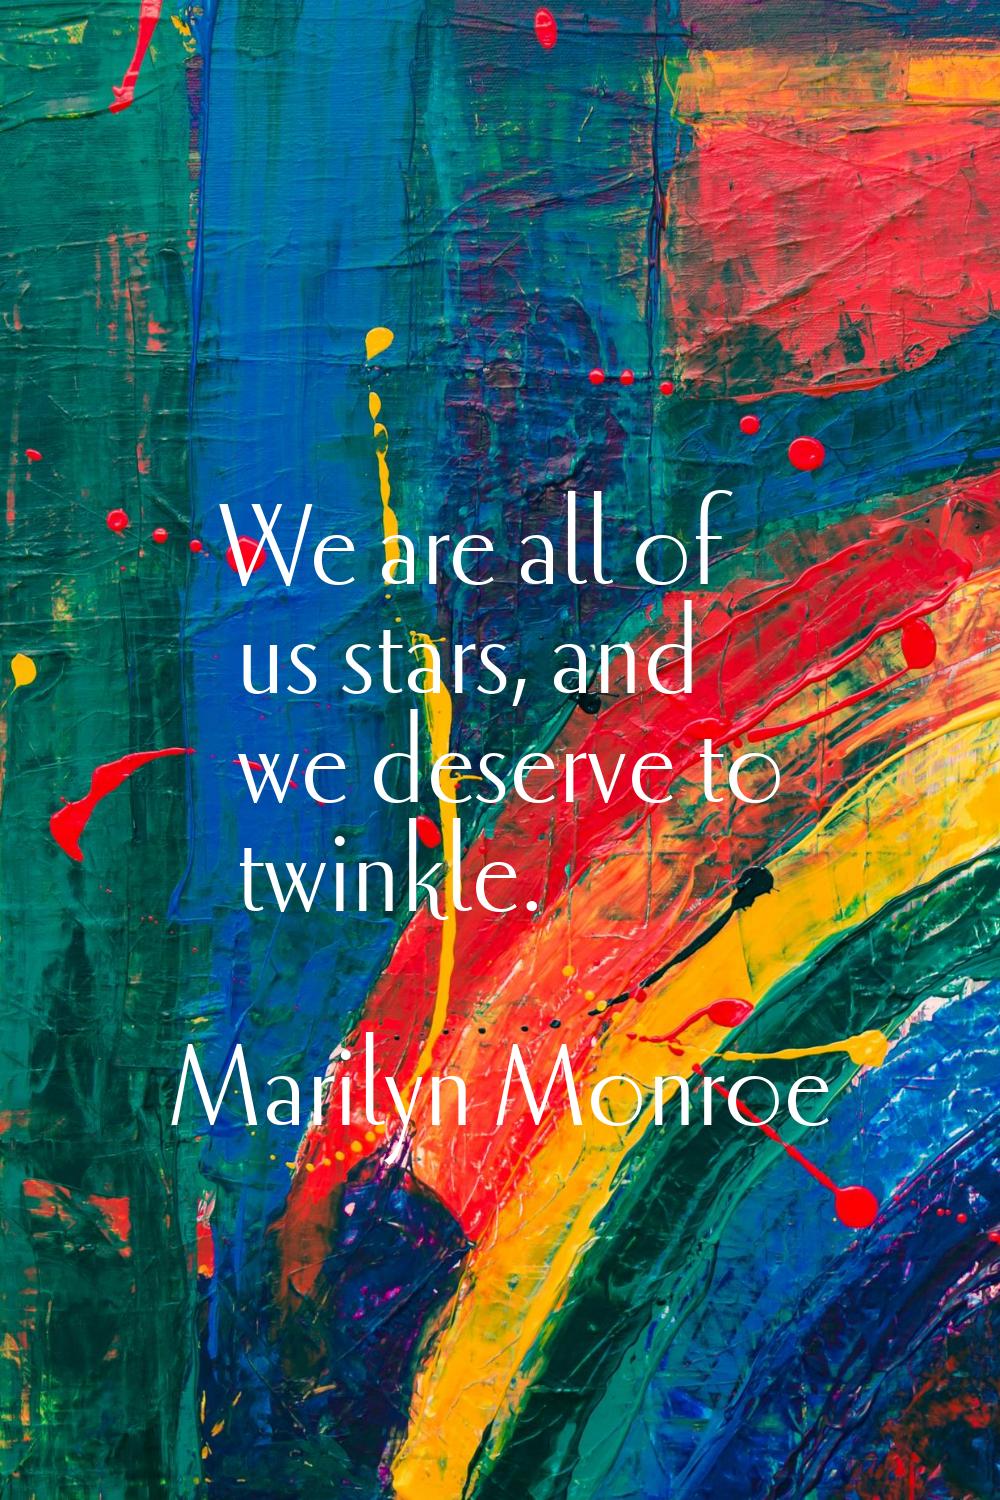 We are all of us stars, and we deserve to twinkle.